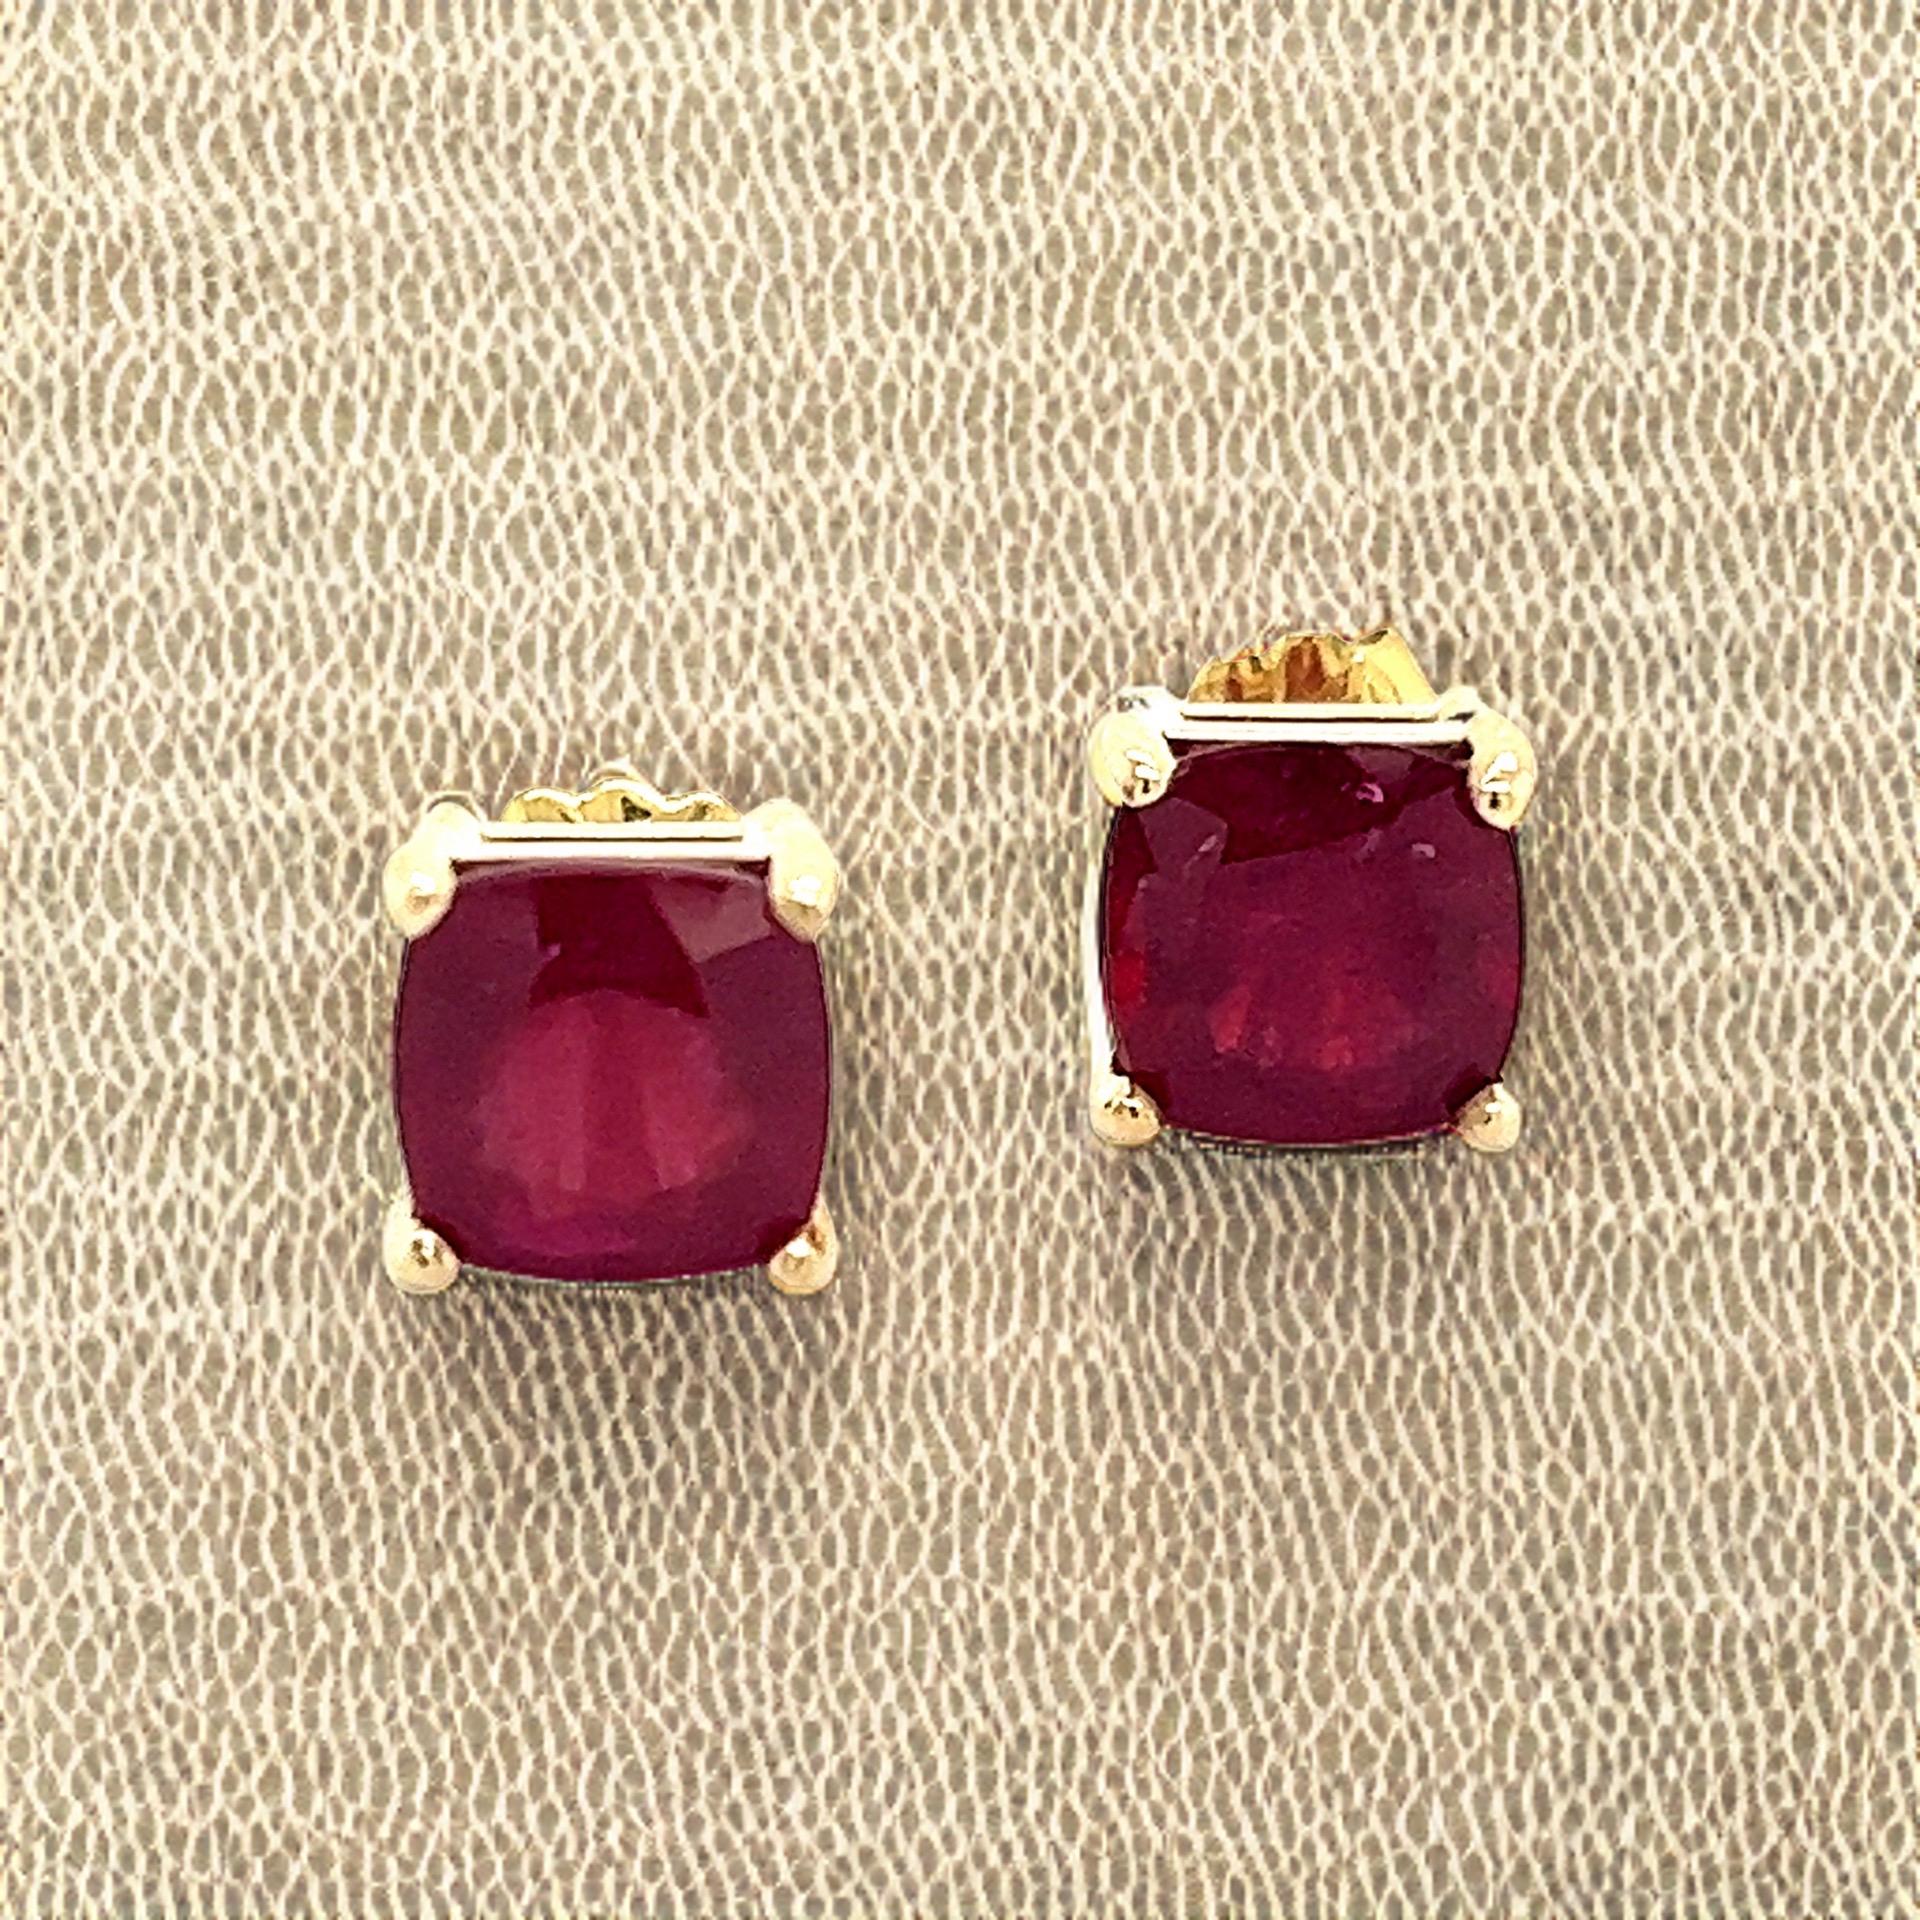 Women's Natural Ruby Stud Earrings 14k Yellow Gold 4.18 TW Certified For Sale